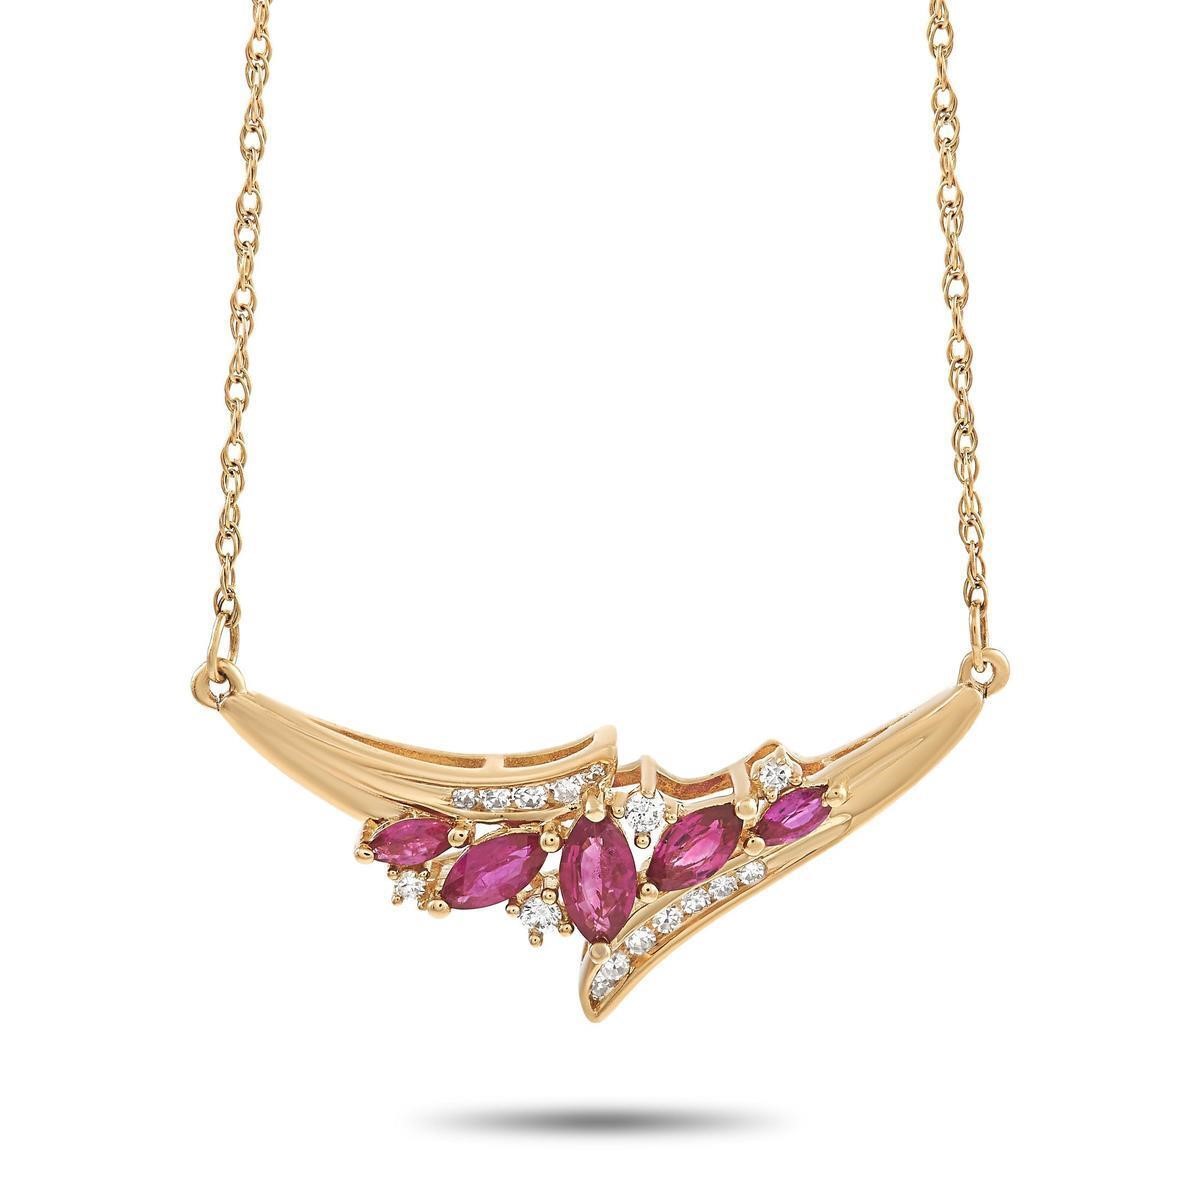 14K Yellow Gold 0.14 ct Diamond and Ruby Necklace